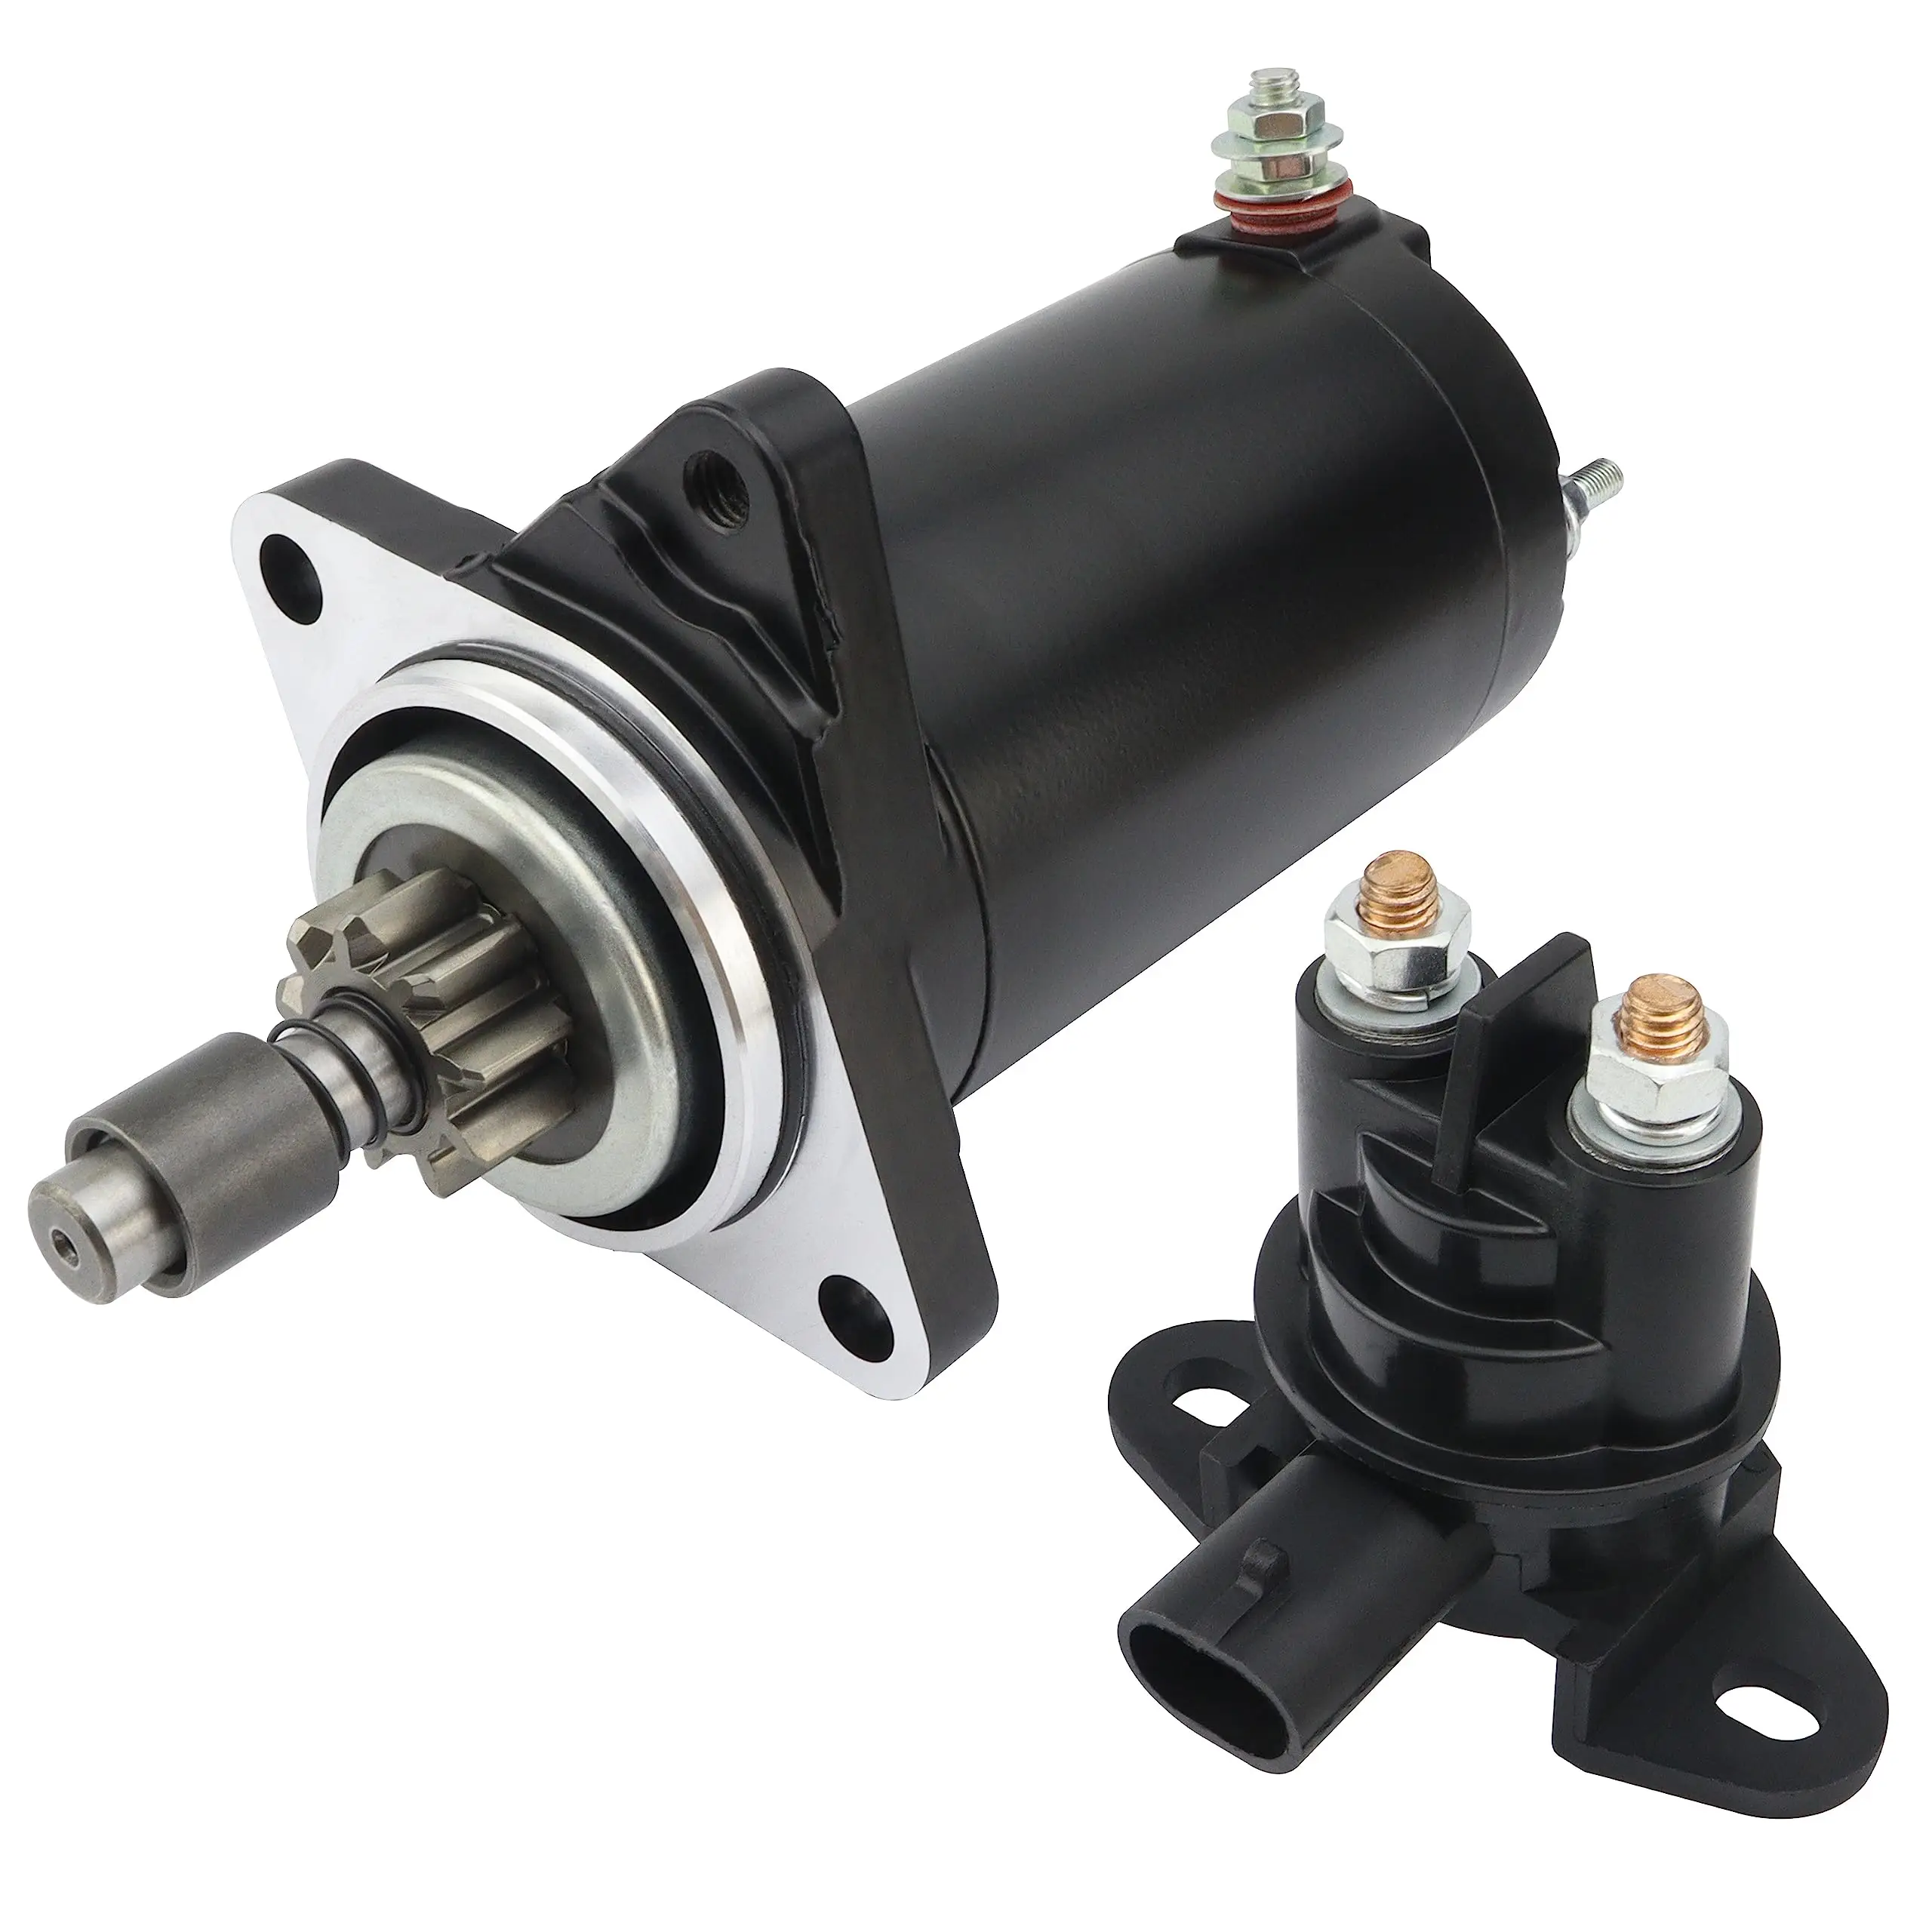 Starter Motor & relay 18415 For SeaDoo SP SPX XP PWC GSI 1997 GTI 718cc 96-05 278-000-484 278-000-485 278-001-300 278-001-935 1x brand new overload protection relay for mercedes w201 w124 w126 1984 1997 2015403745 high quality car parts